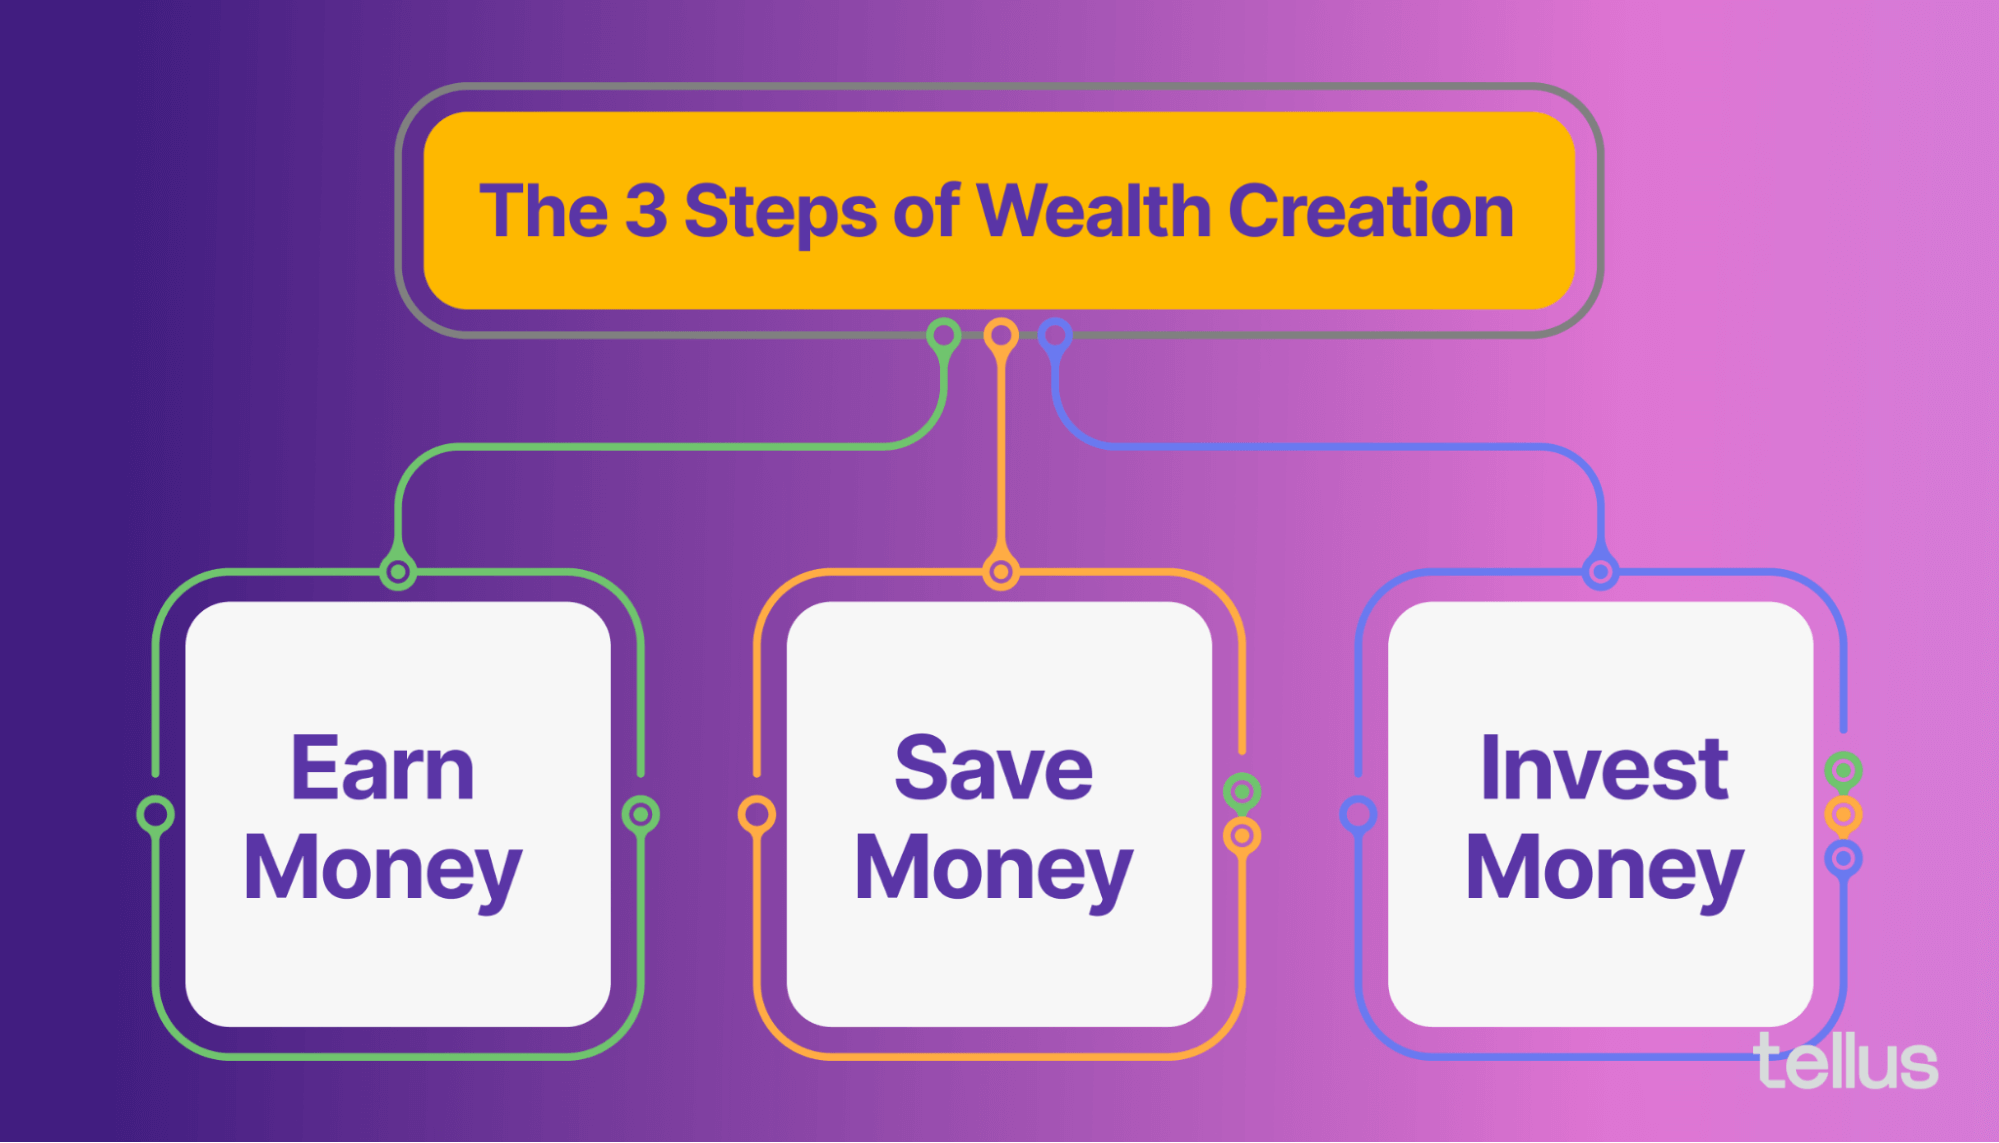 The 3 steps of wealth creation